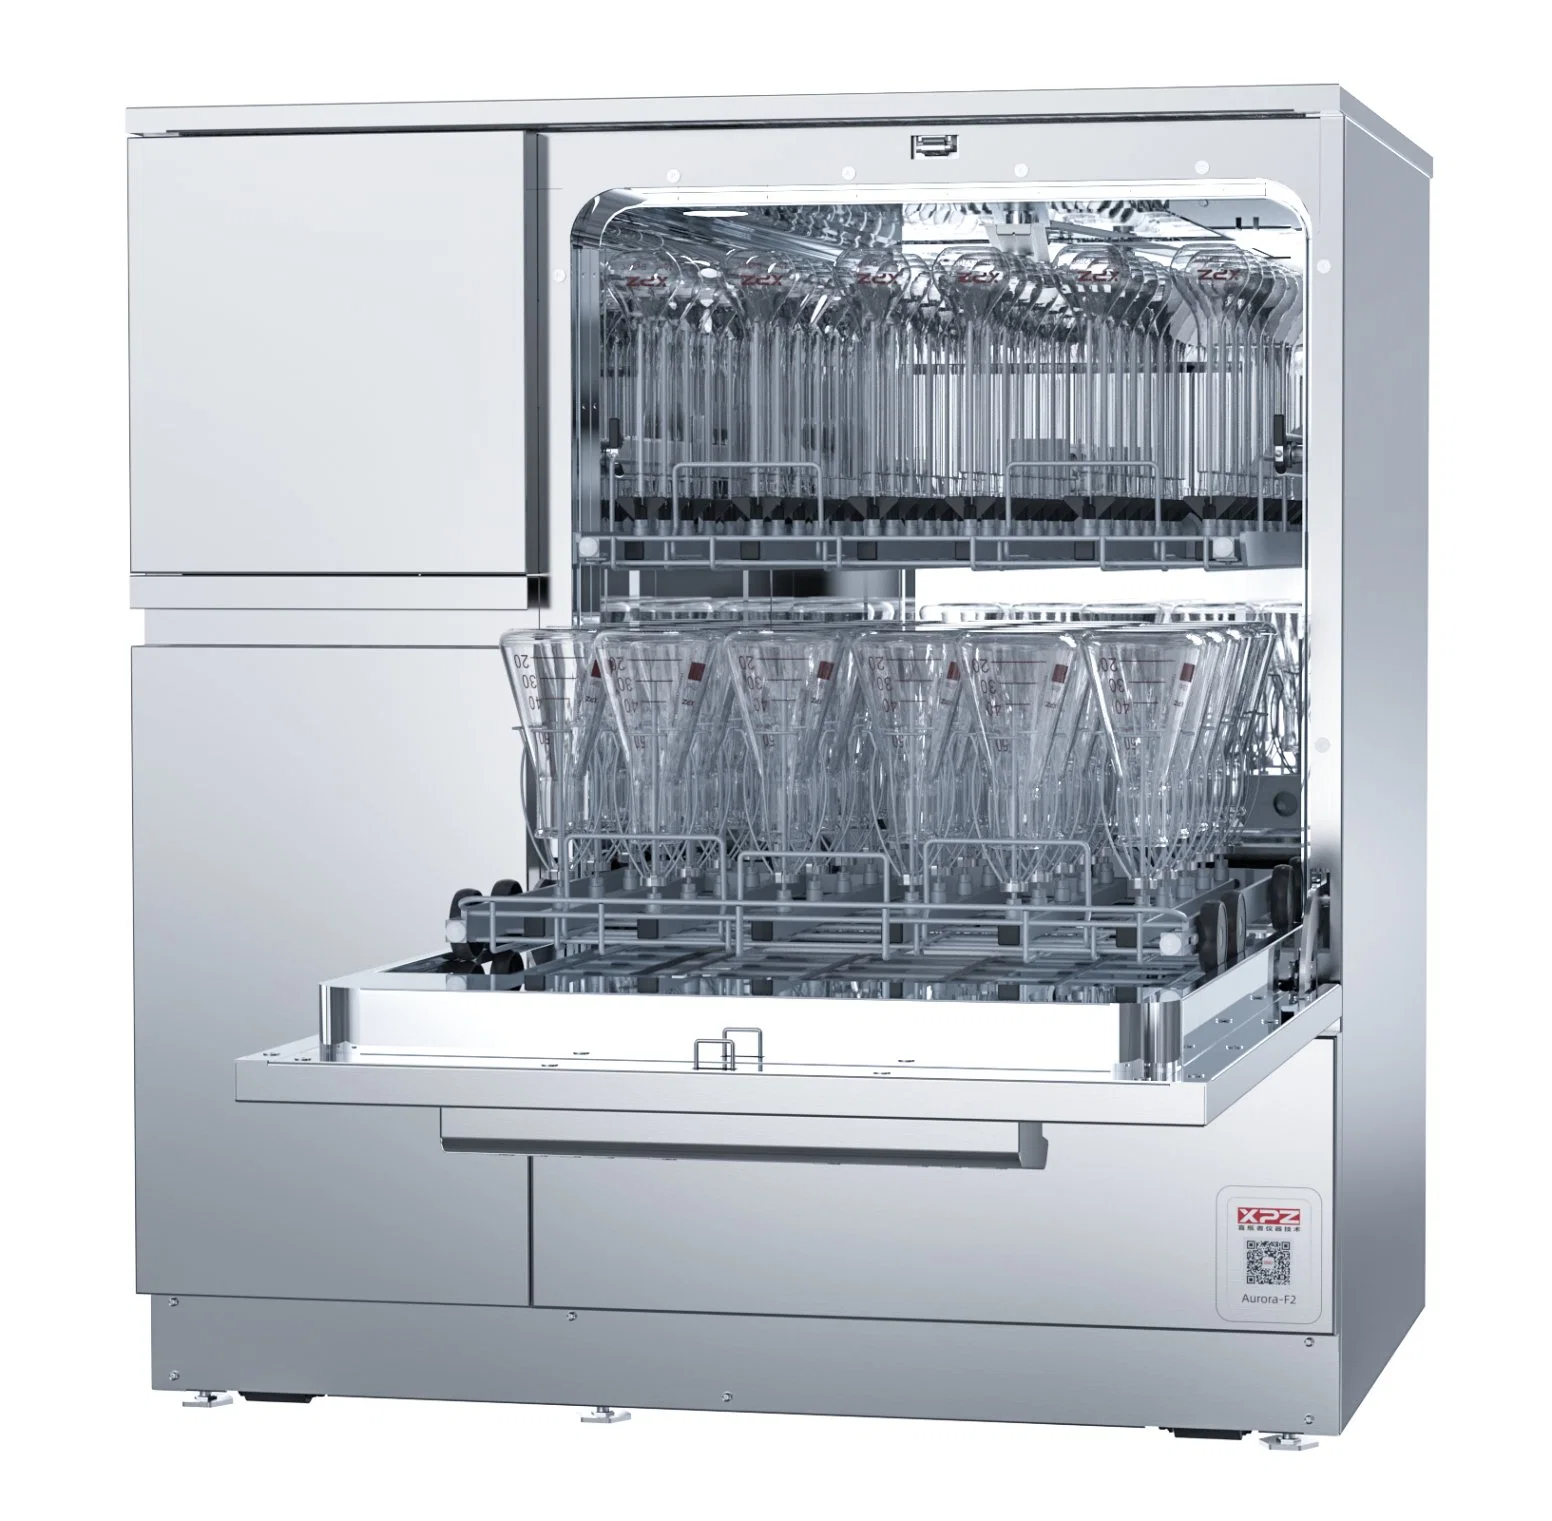 Fully Automatic Laboratory Glassware Washing Machine with Hot Air Drying in Situ Can Clean 84 100ml Volumetric Flasks at a Time